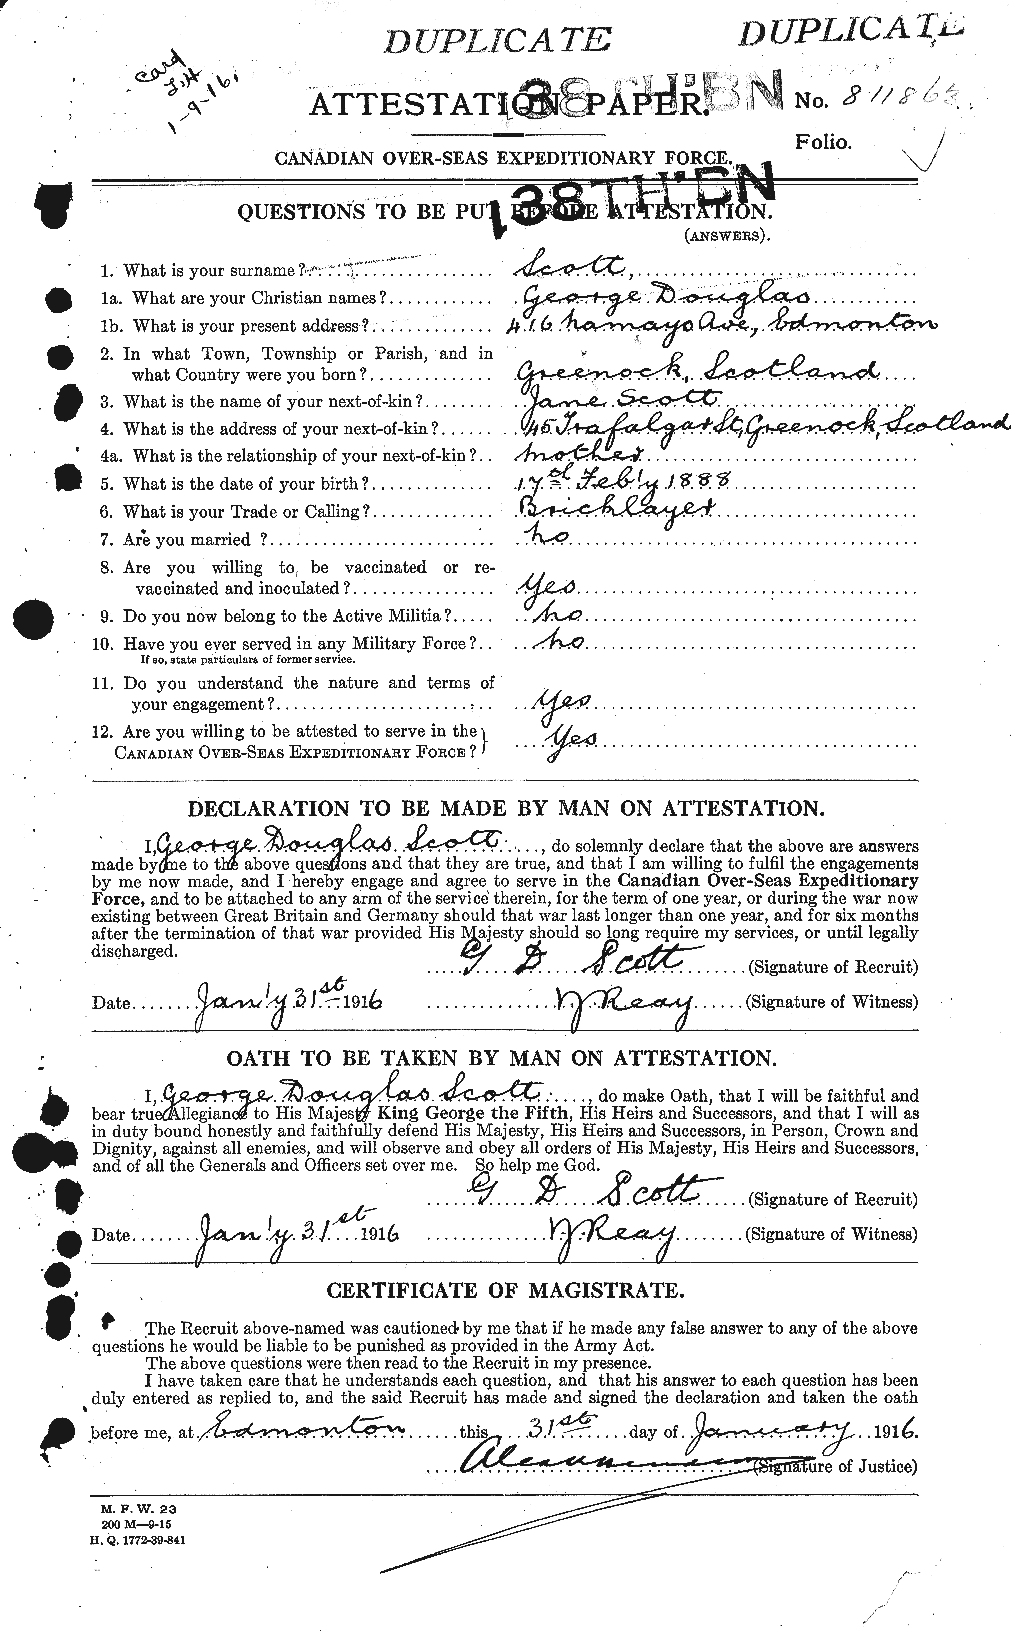 Personnel Records of the First World War - CEF 083560a